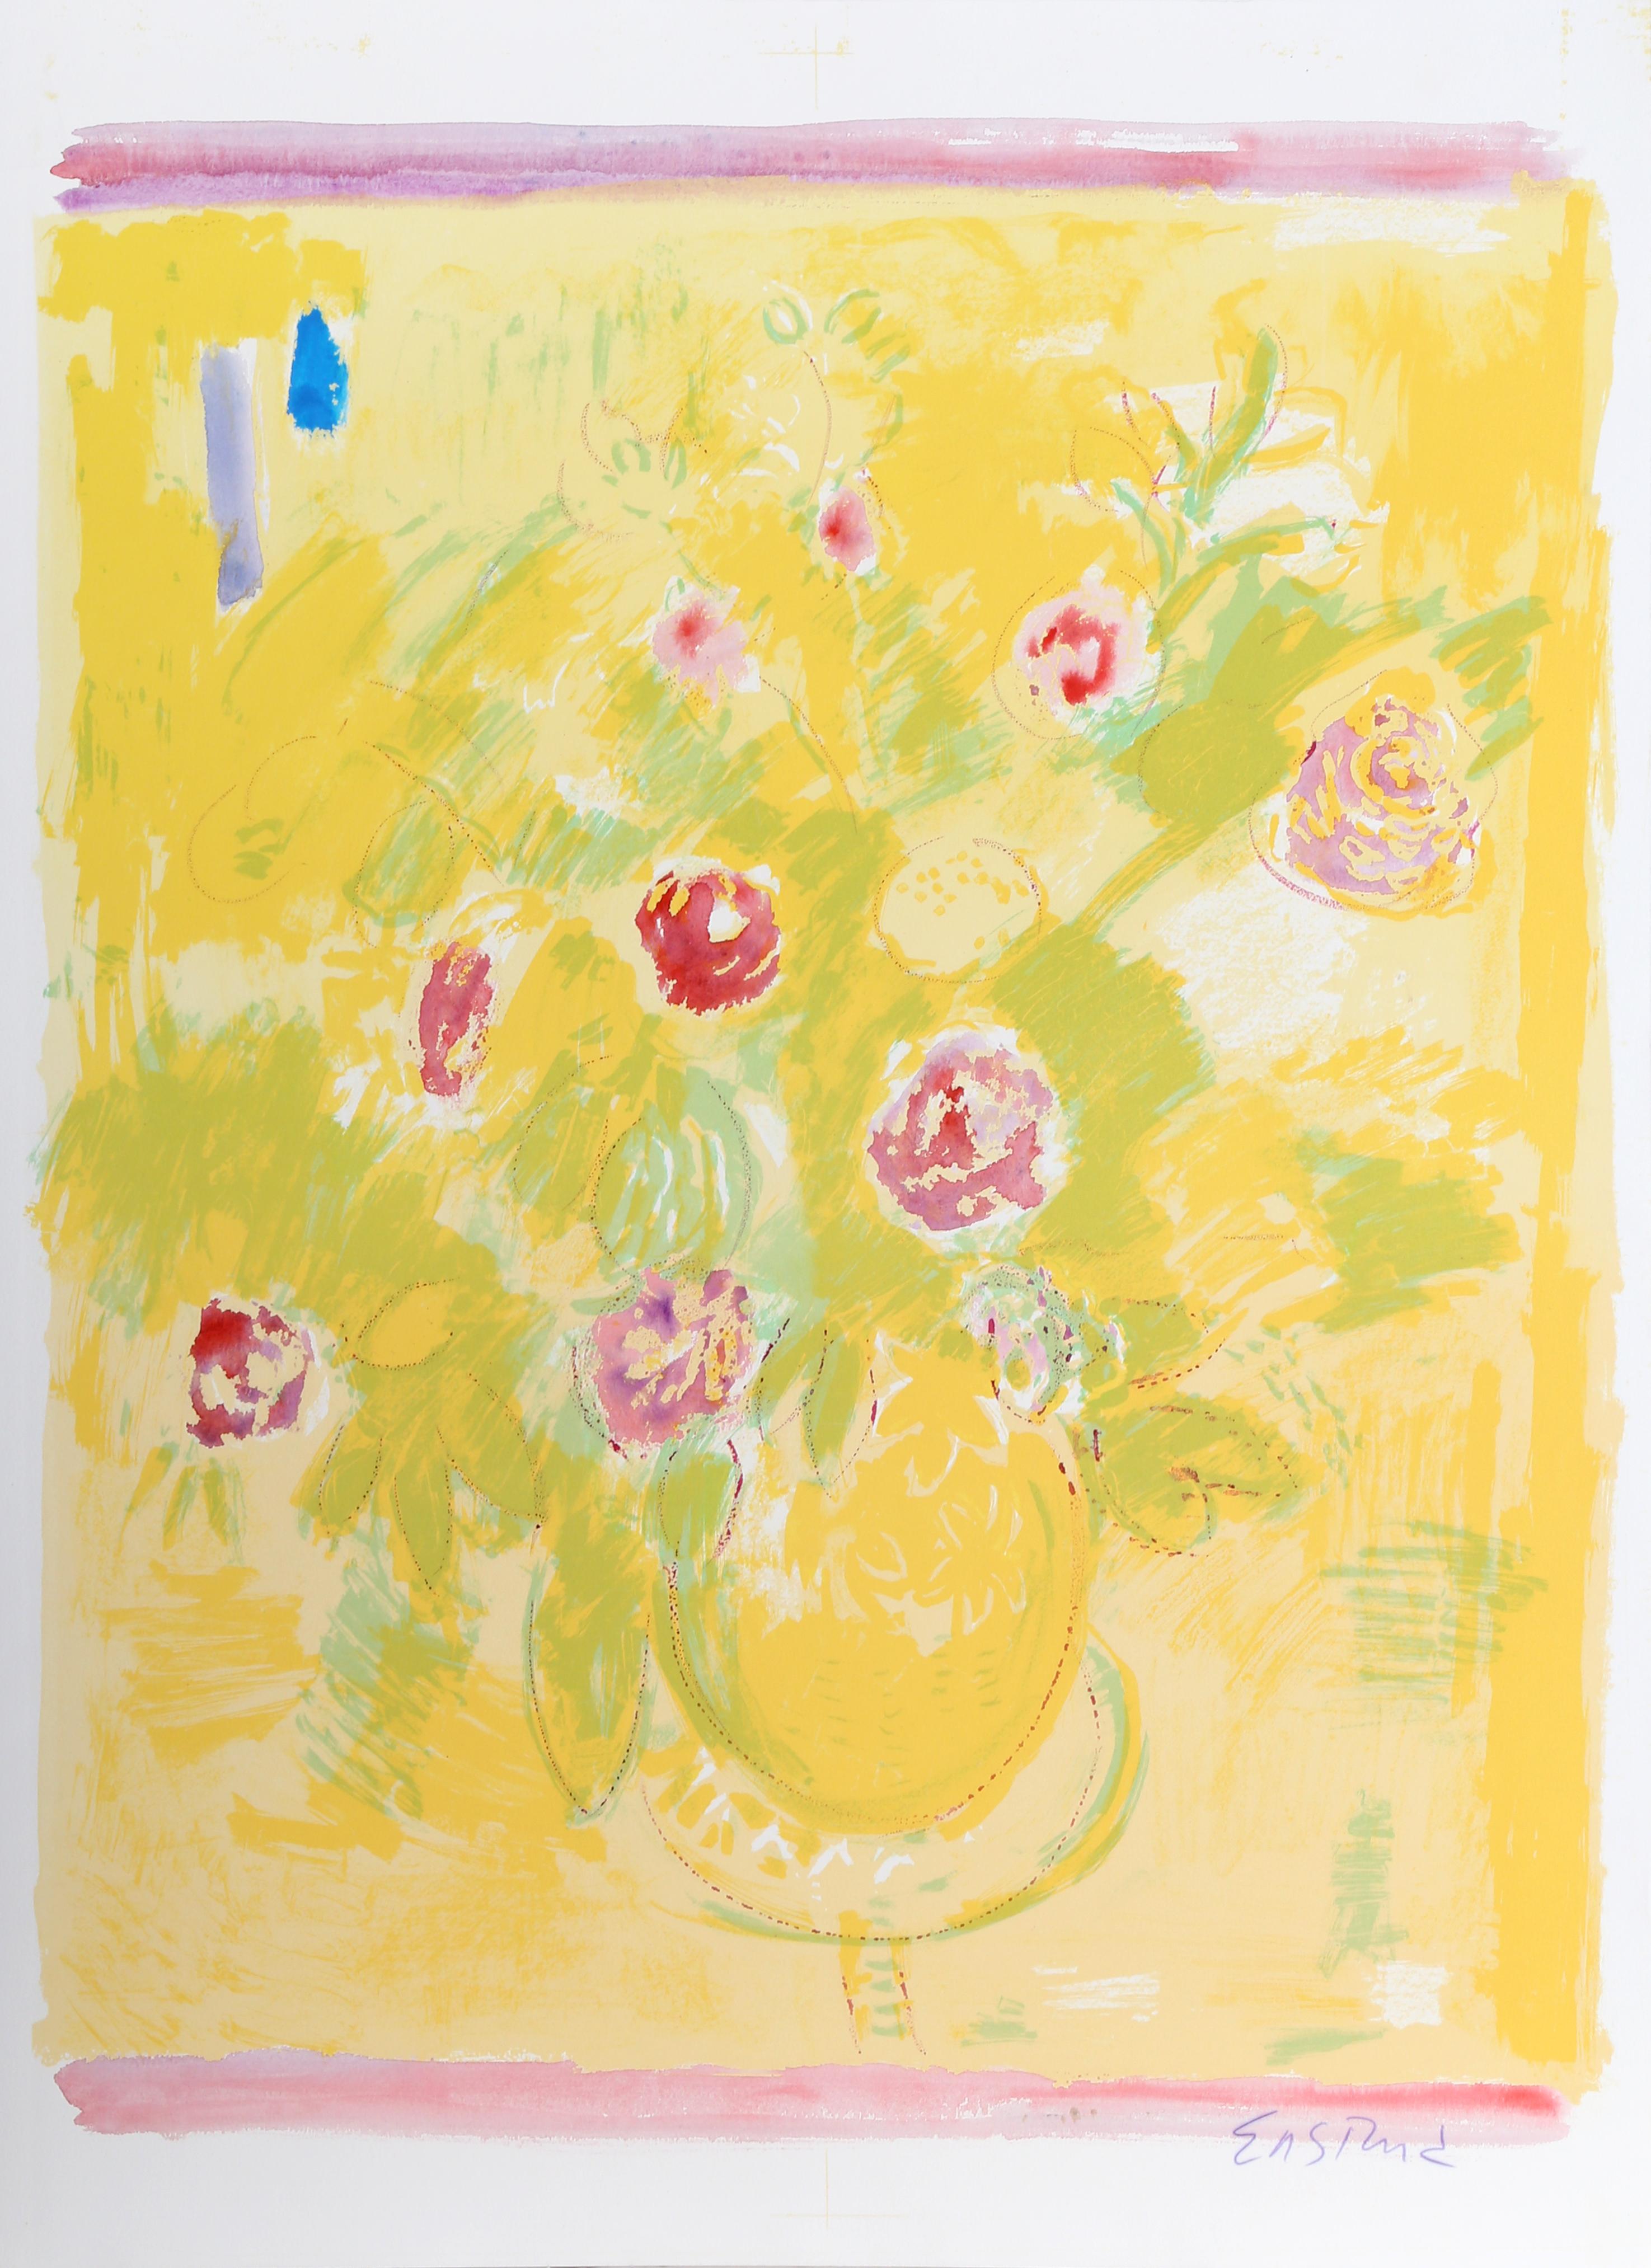 Quiet Sunday (Yellow), Hand-painted Lithograph by Wayne Ensrud